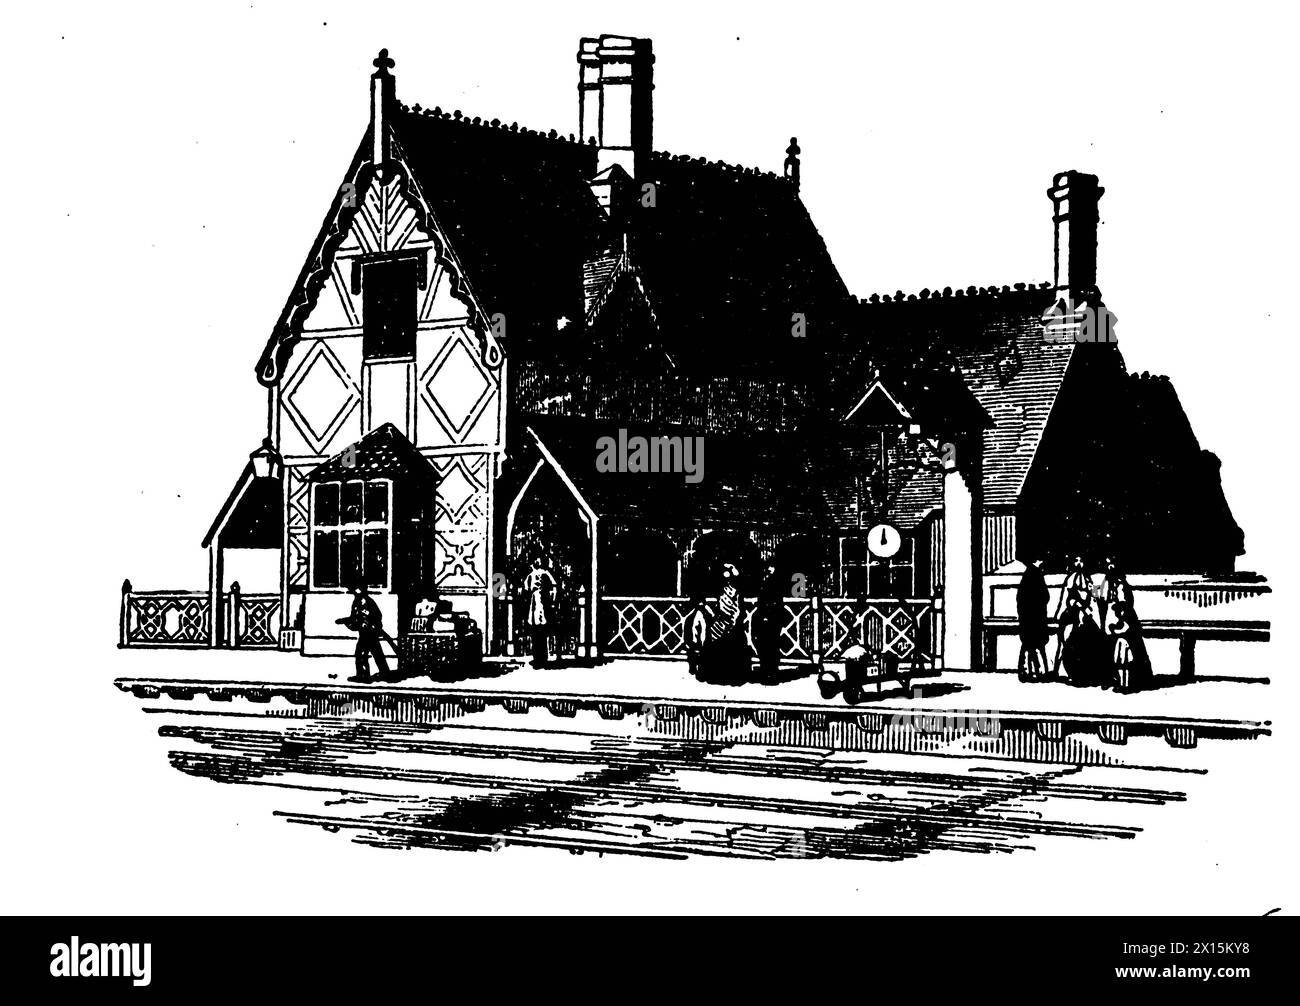 A historic 19th century illustration in black and white of a railway station. Stock Photo